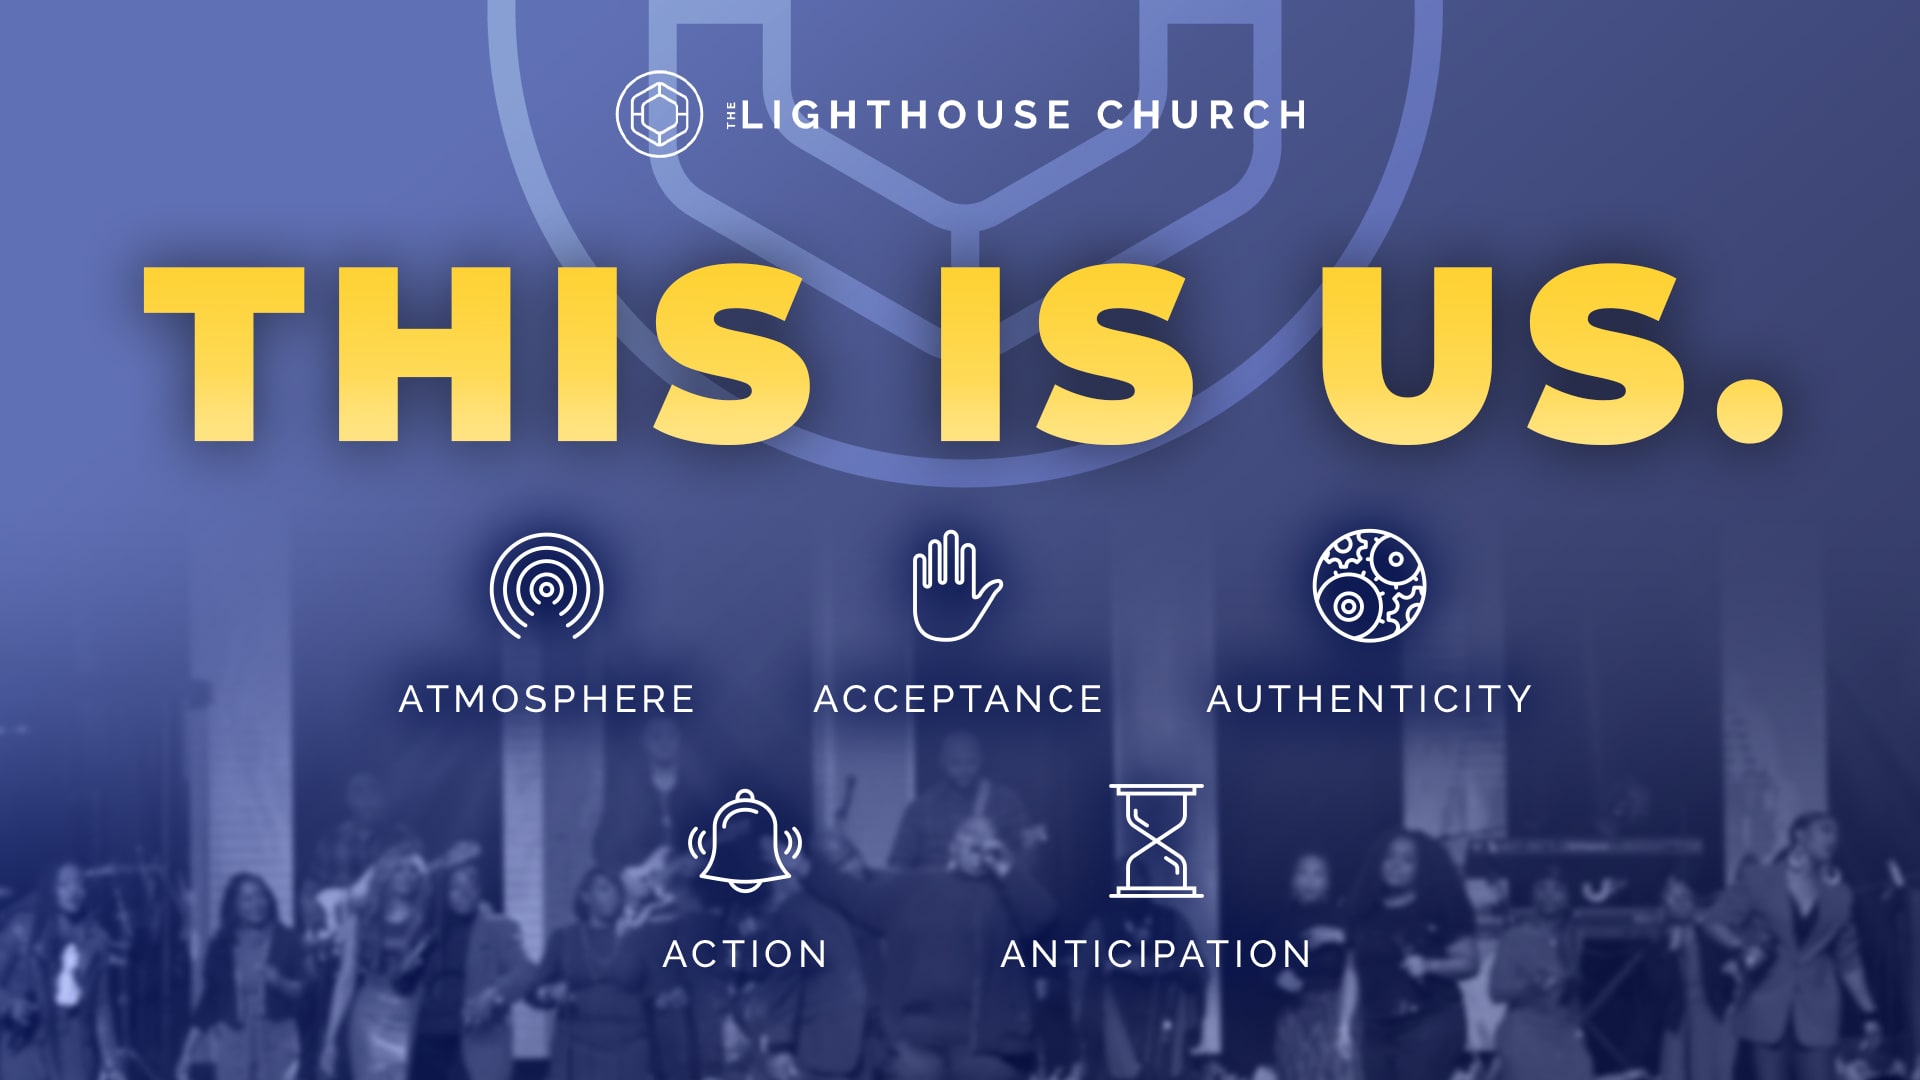 This Is Us: A Look at The Lighthouse Church